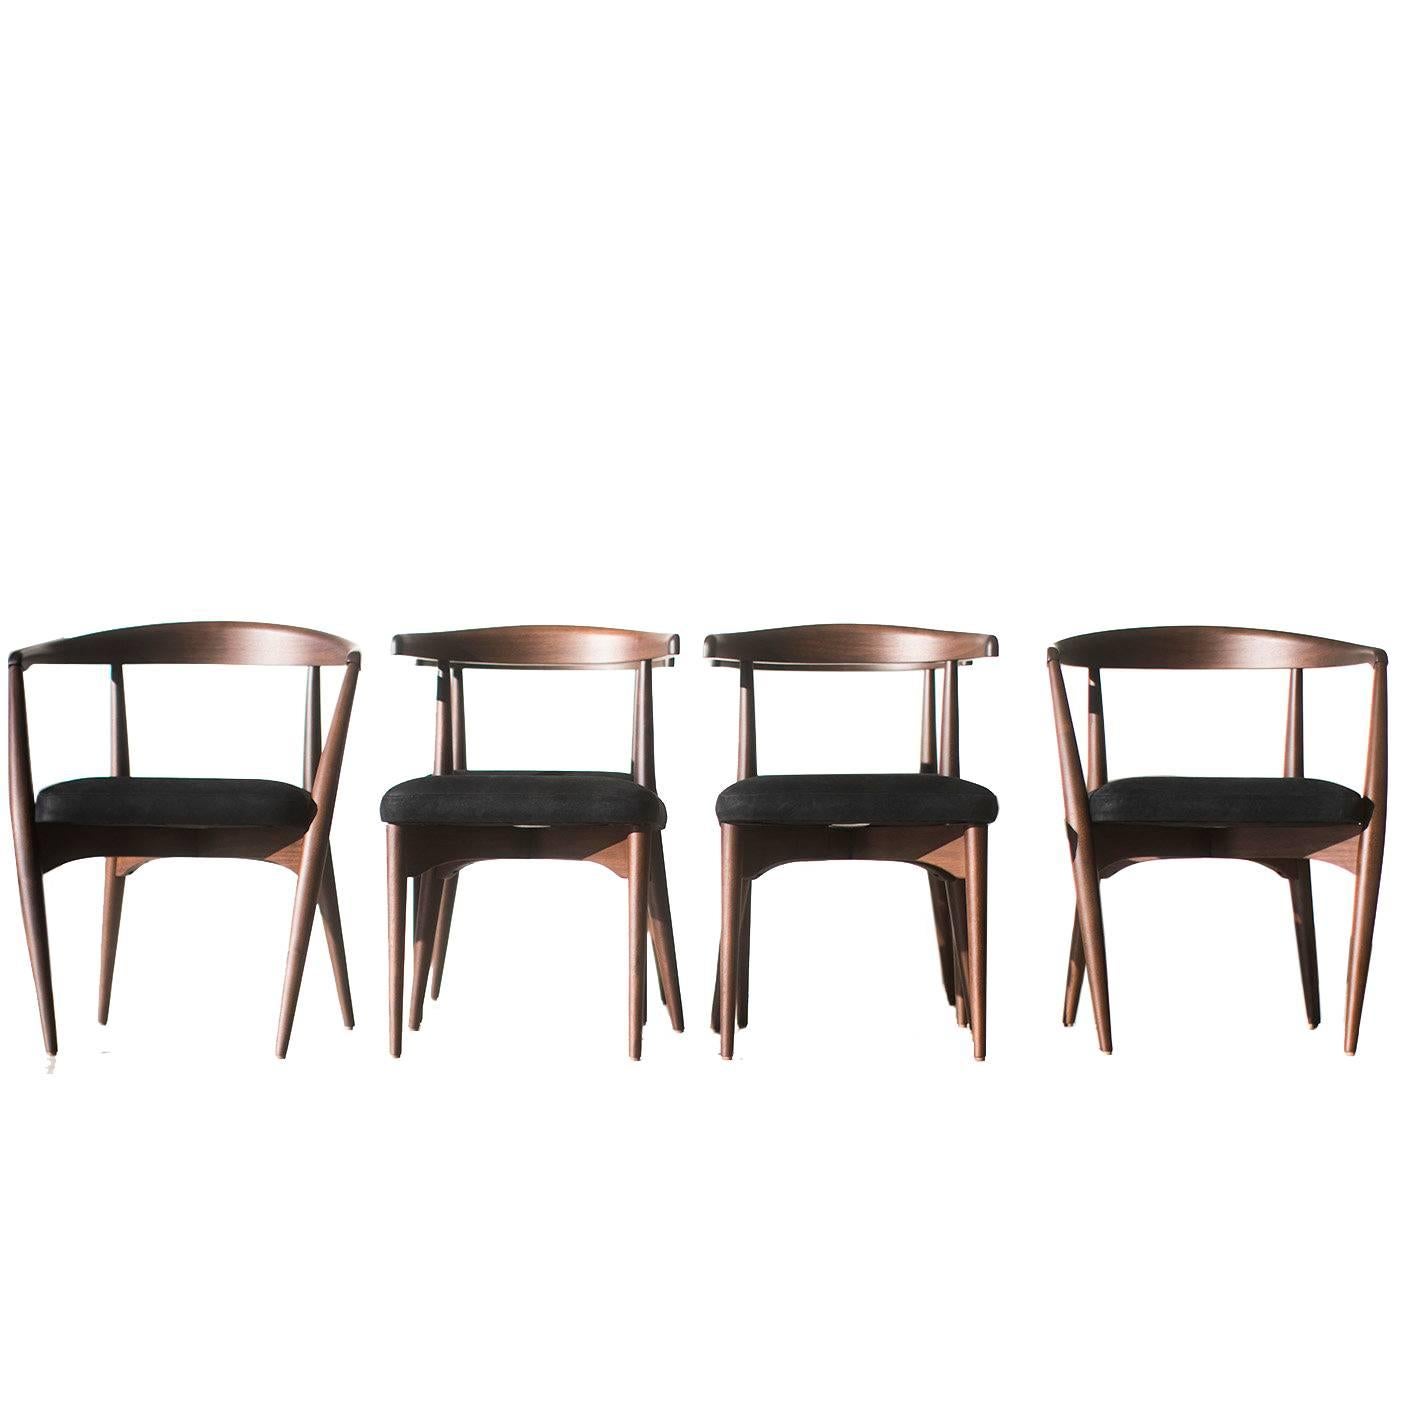 Lawrence Peabody Dining Chairs for Craft Associates